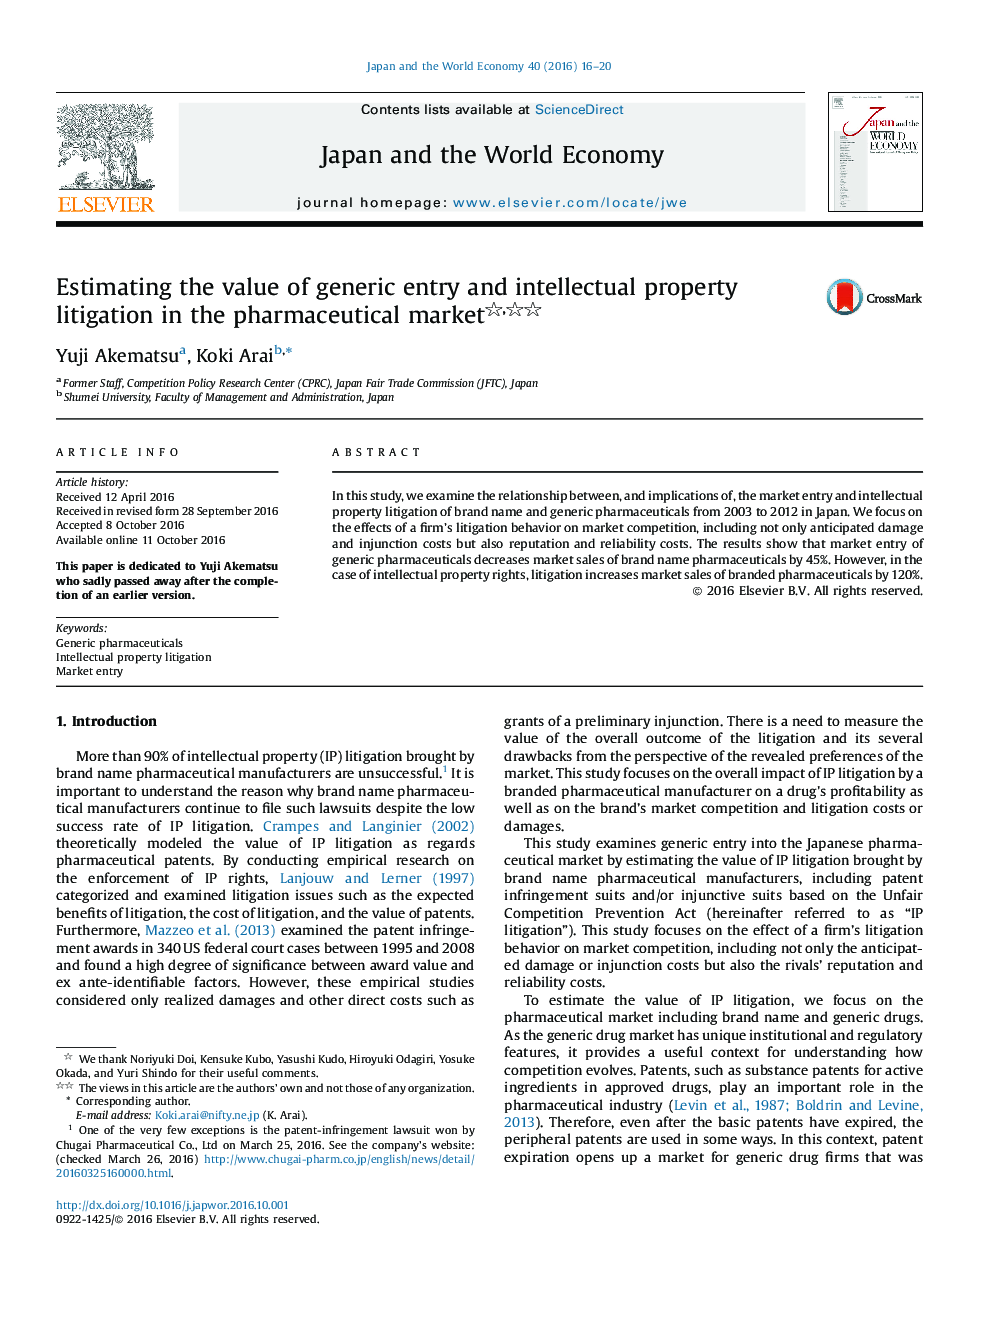 Estimating the value of generic entry and intellectual property litigation in the pharmaceutical market